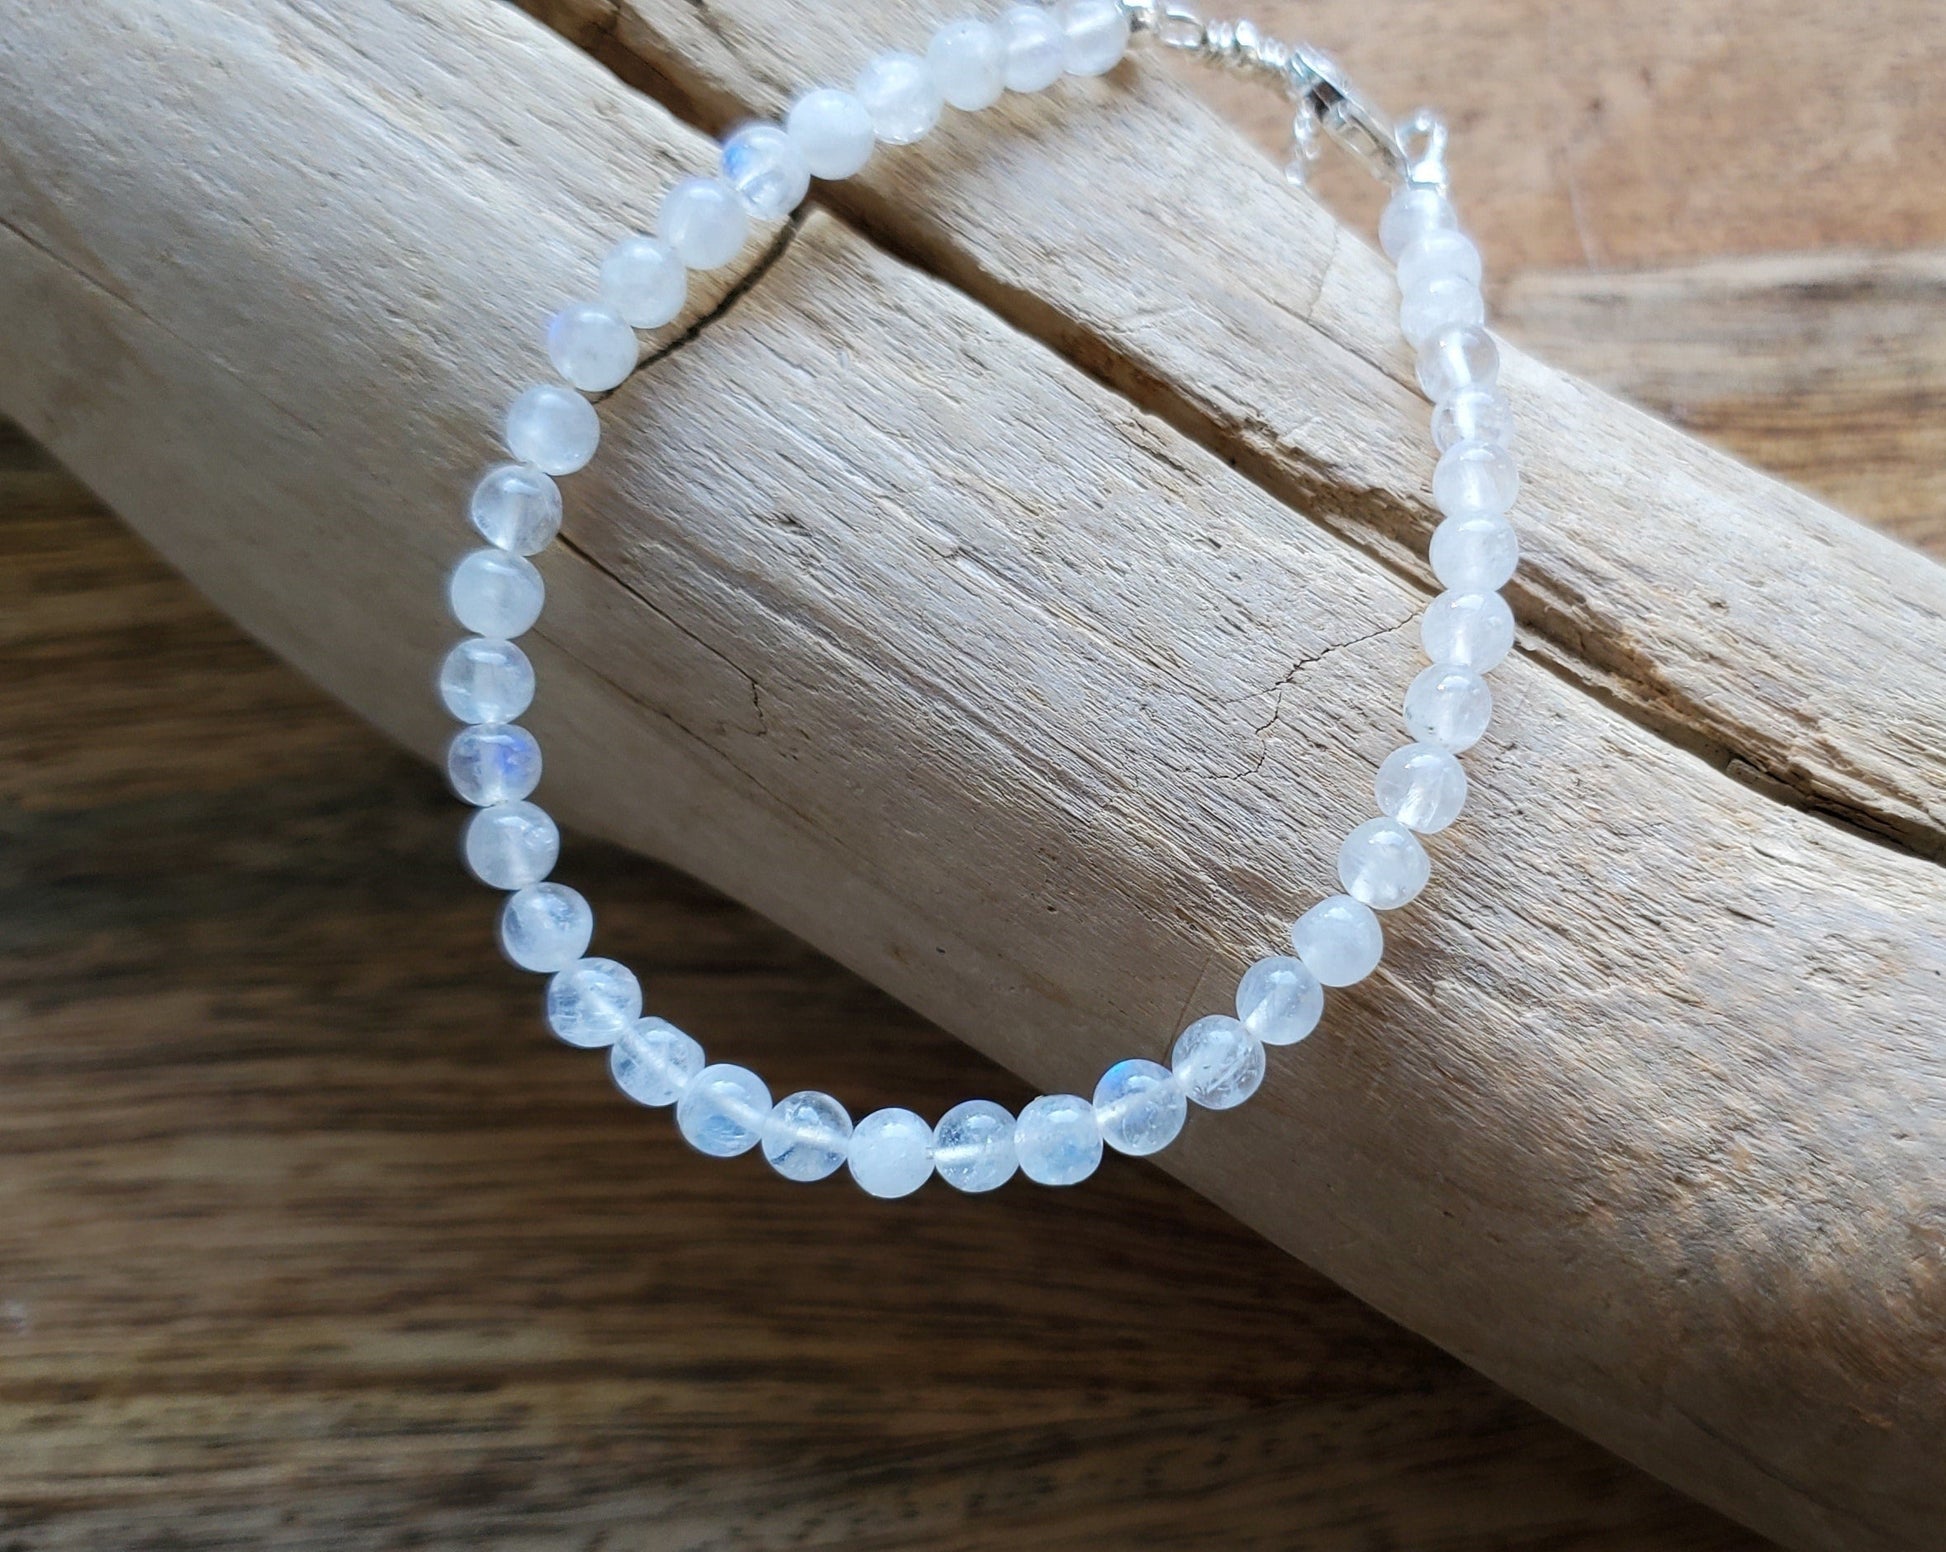 Rainbow Moonstone beaded bracelets, minimalist style with Sterling Silver lobster claw clasp, extension chain and Star pendant. 